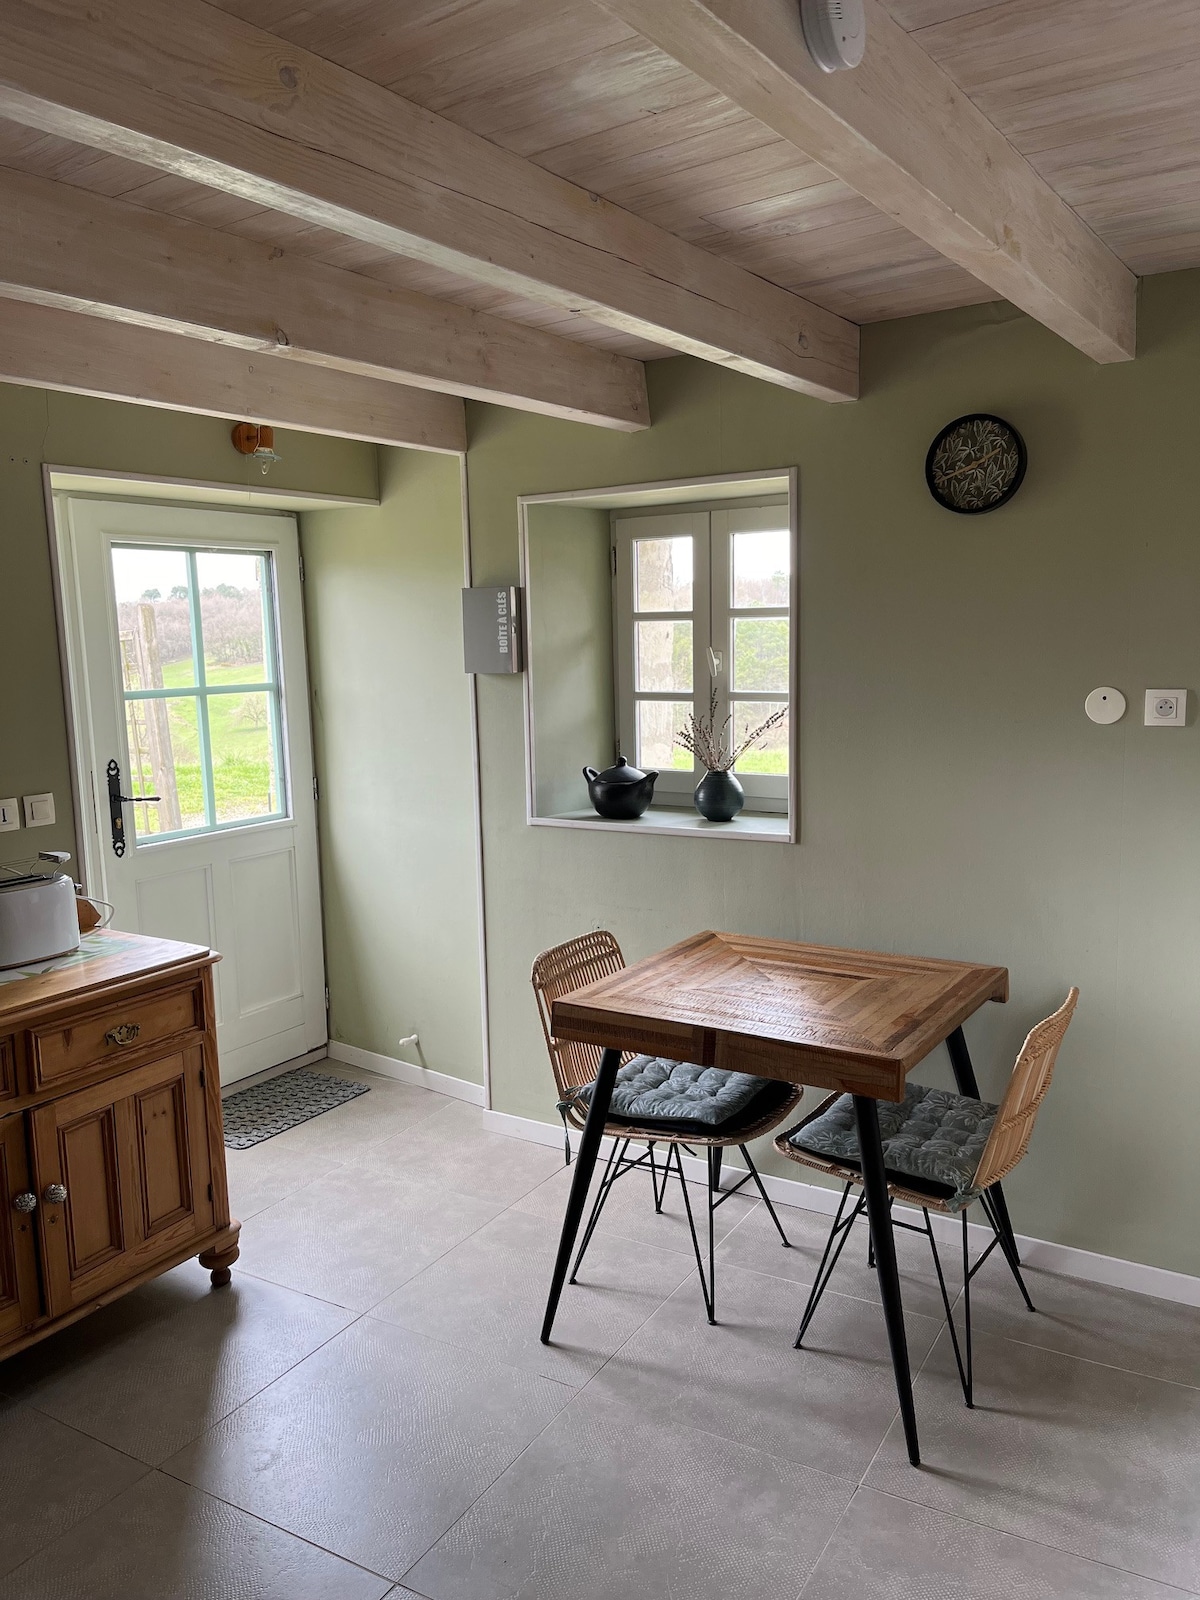 Piaf - lovely country cottage in a quiet setting.